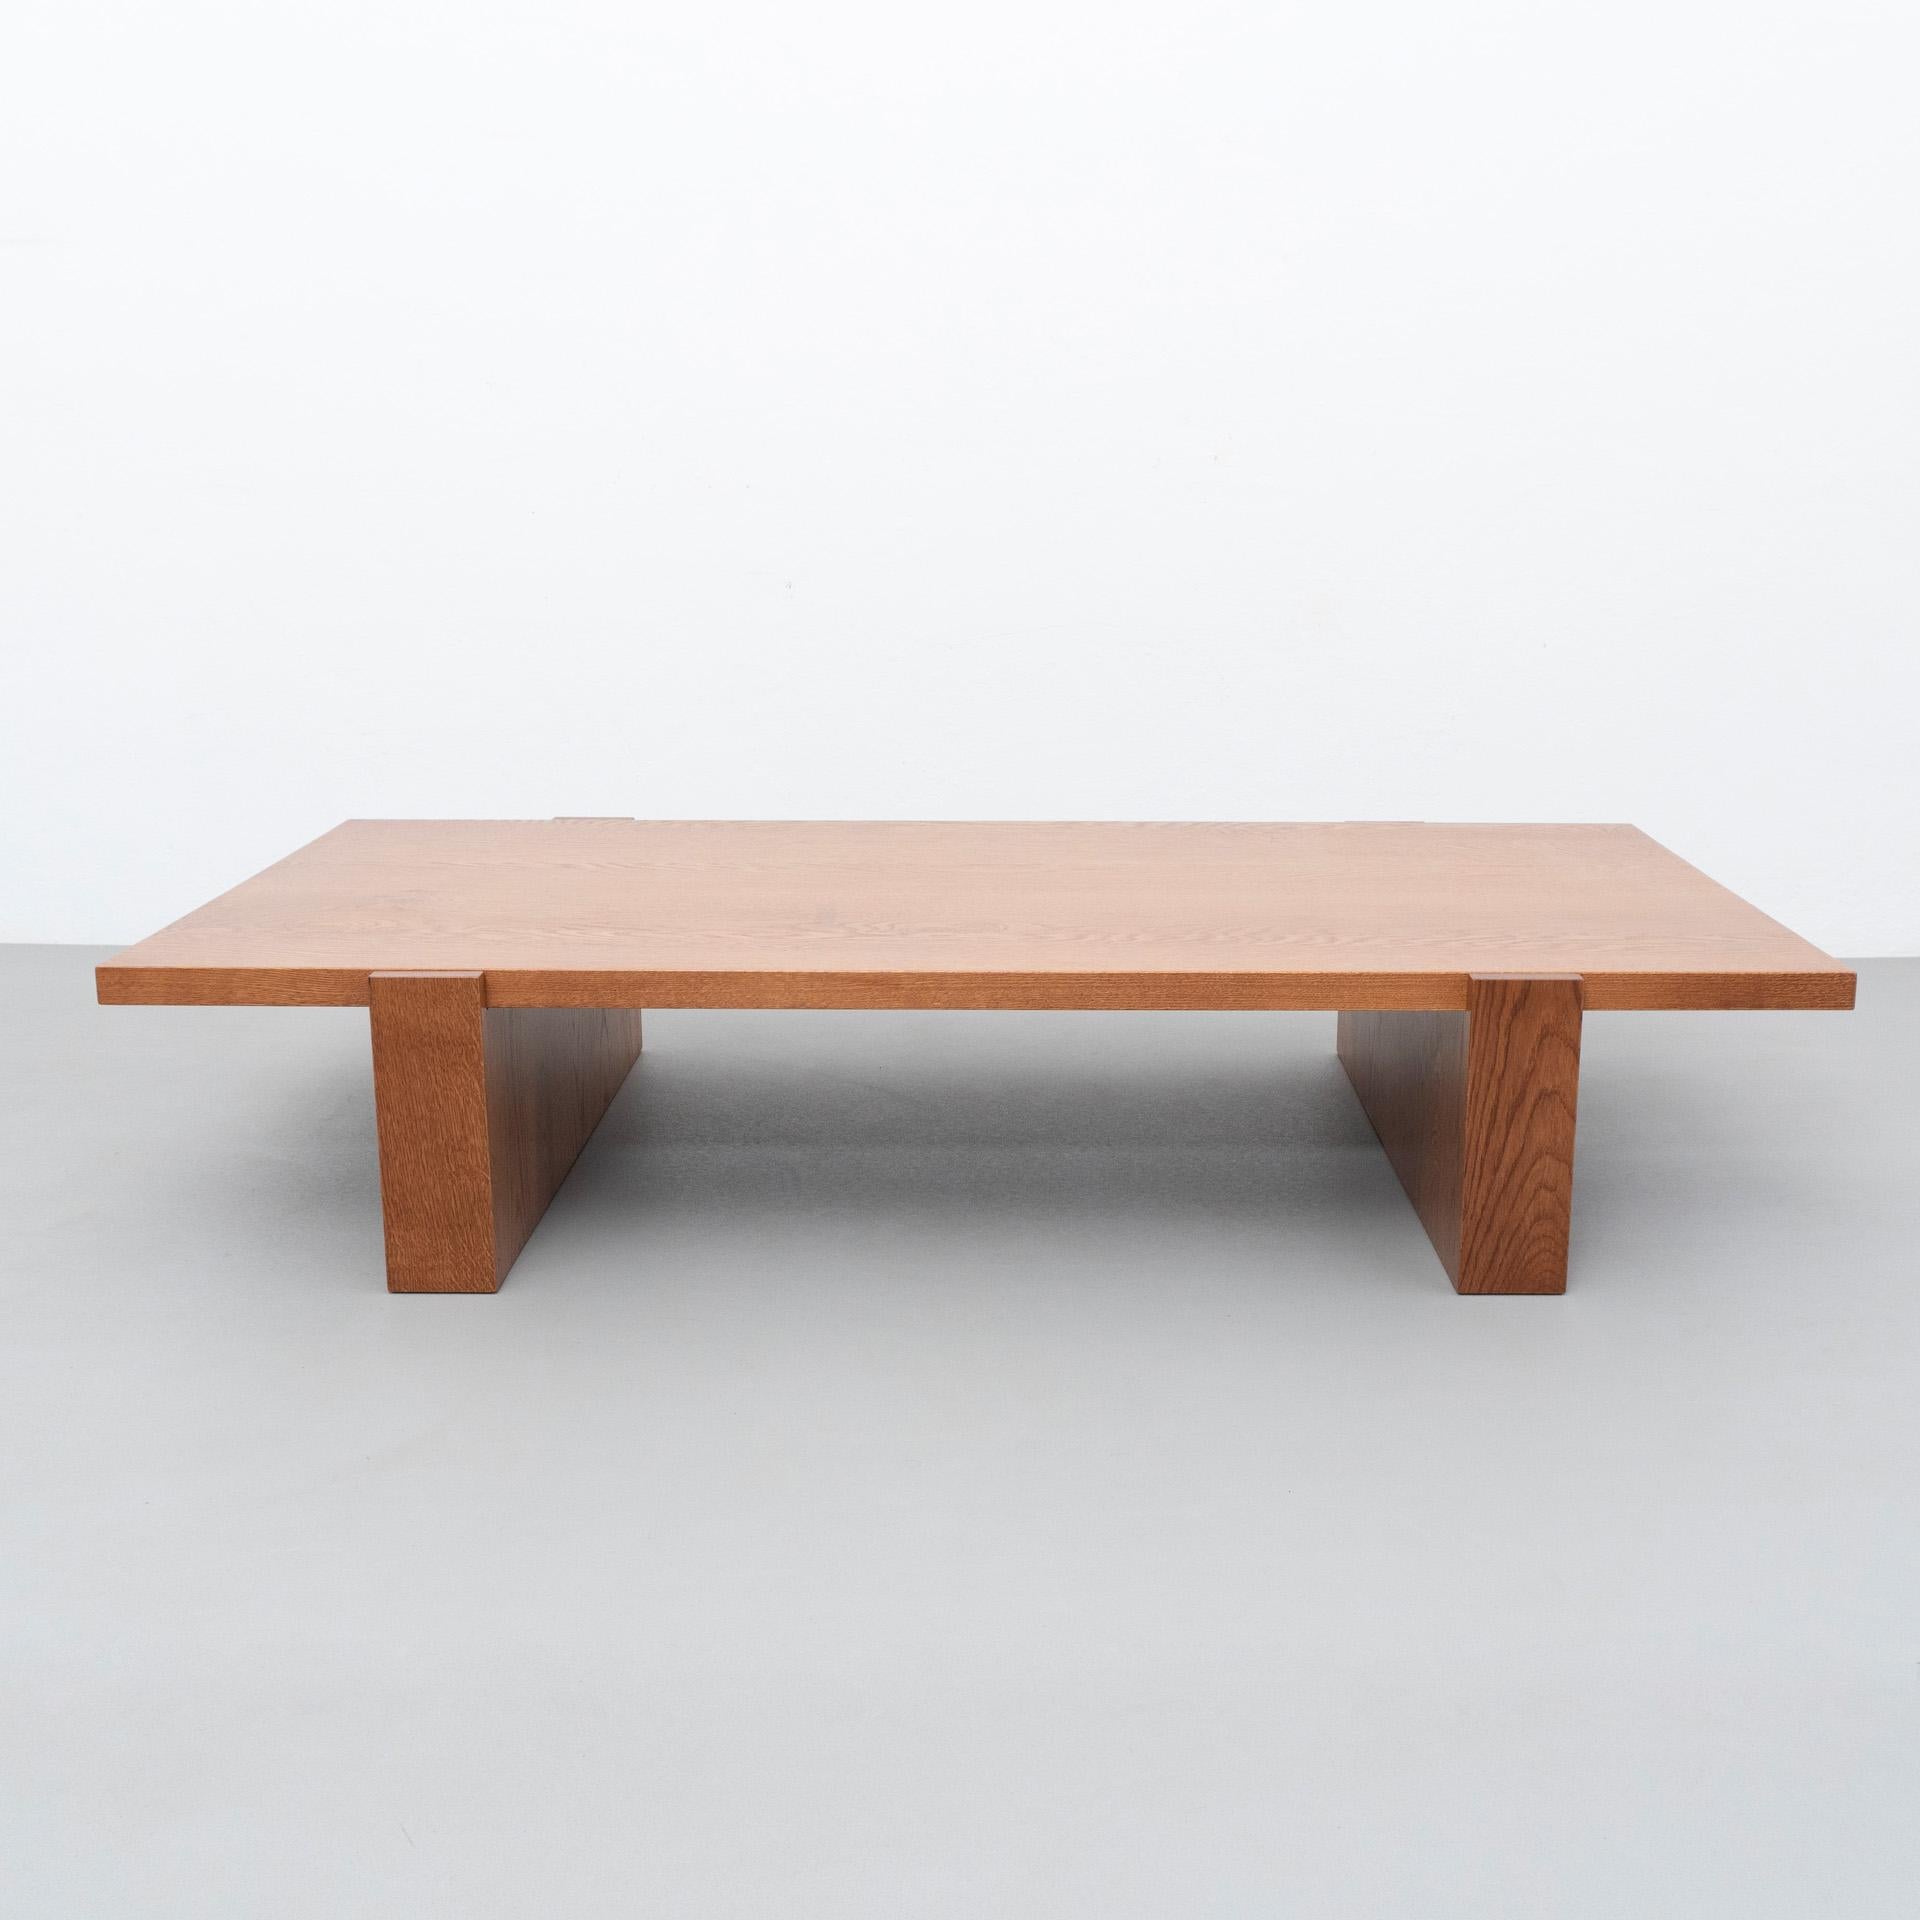 Table by Dada est. manufactured in Barcelona, 2021.
Detachable table with two legs.

 Materials: Oak 

Measures: 84.5 cm D x 160 cm W x 30 cm H 

Production delay: 8-9 weeks

There is the possibility of making it in different measures and